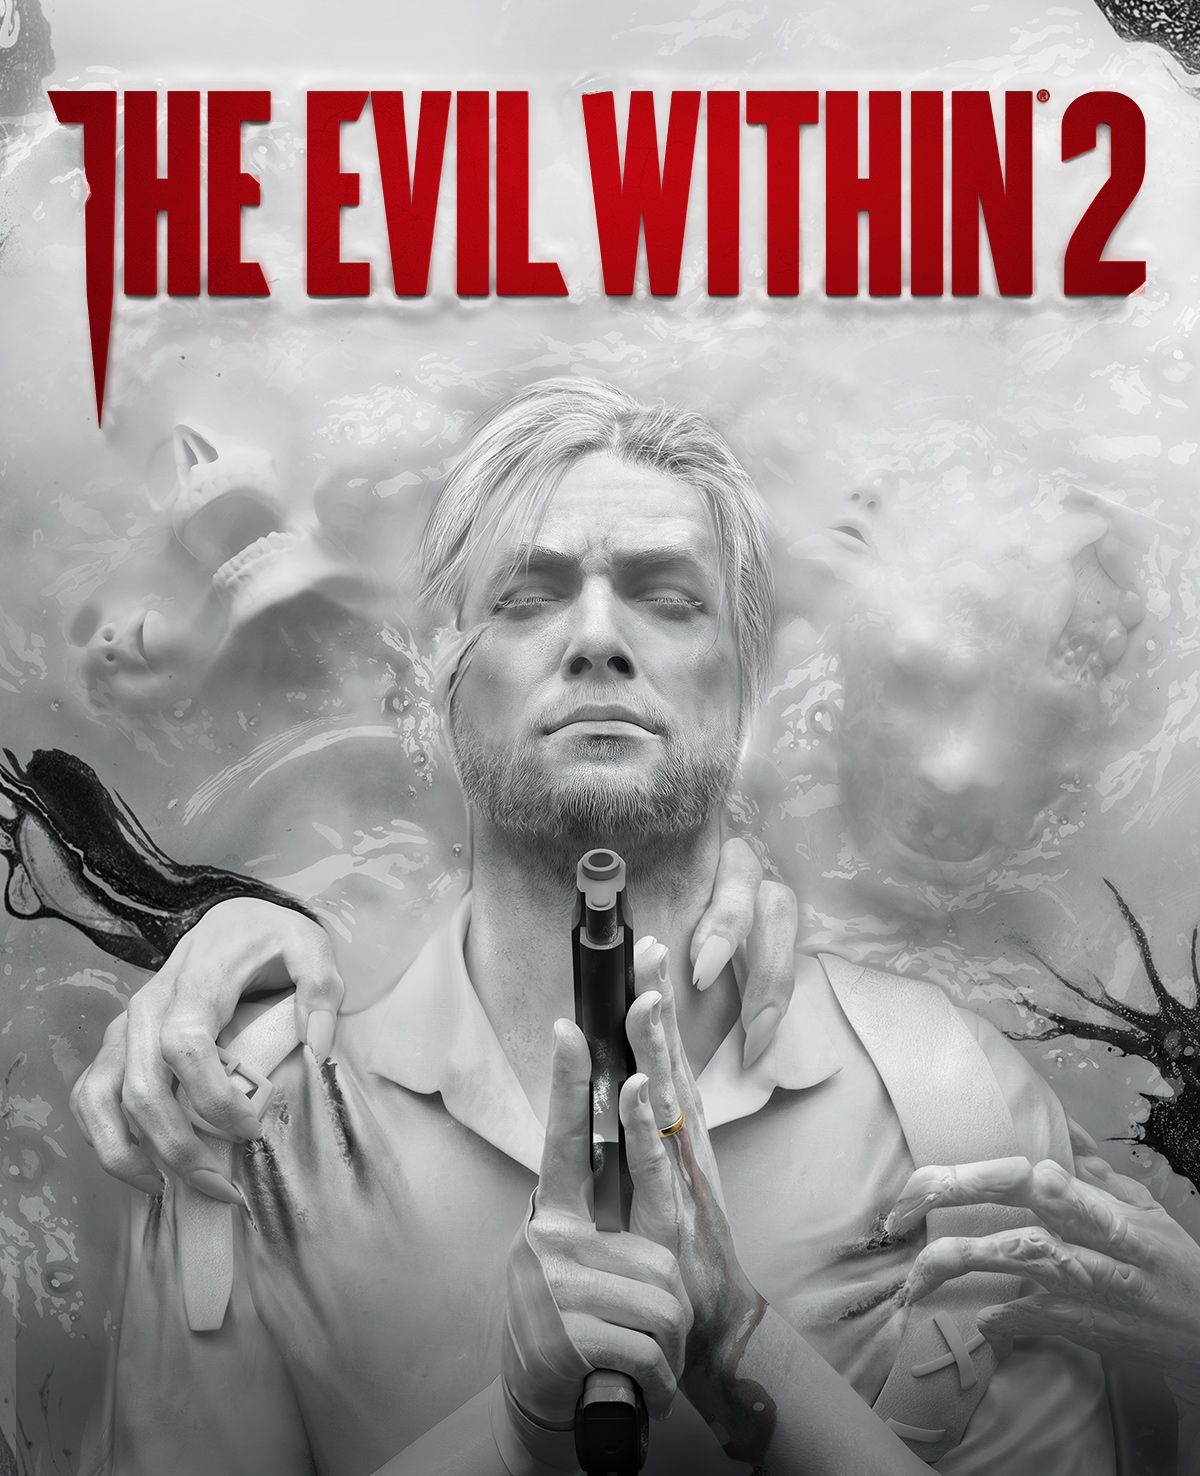 Bethesda The evil within 2 - xbox one